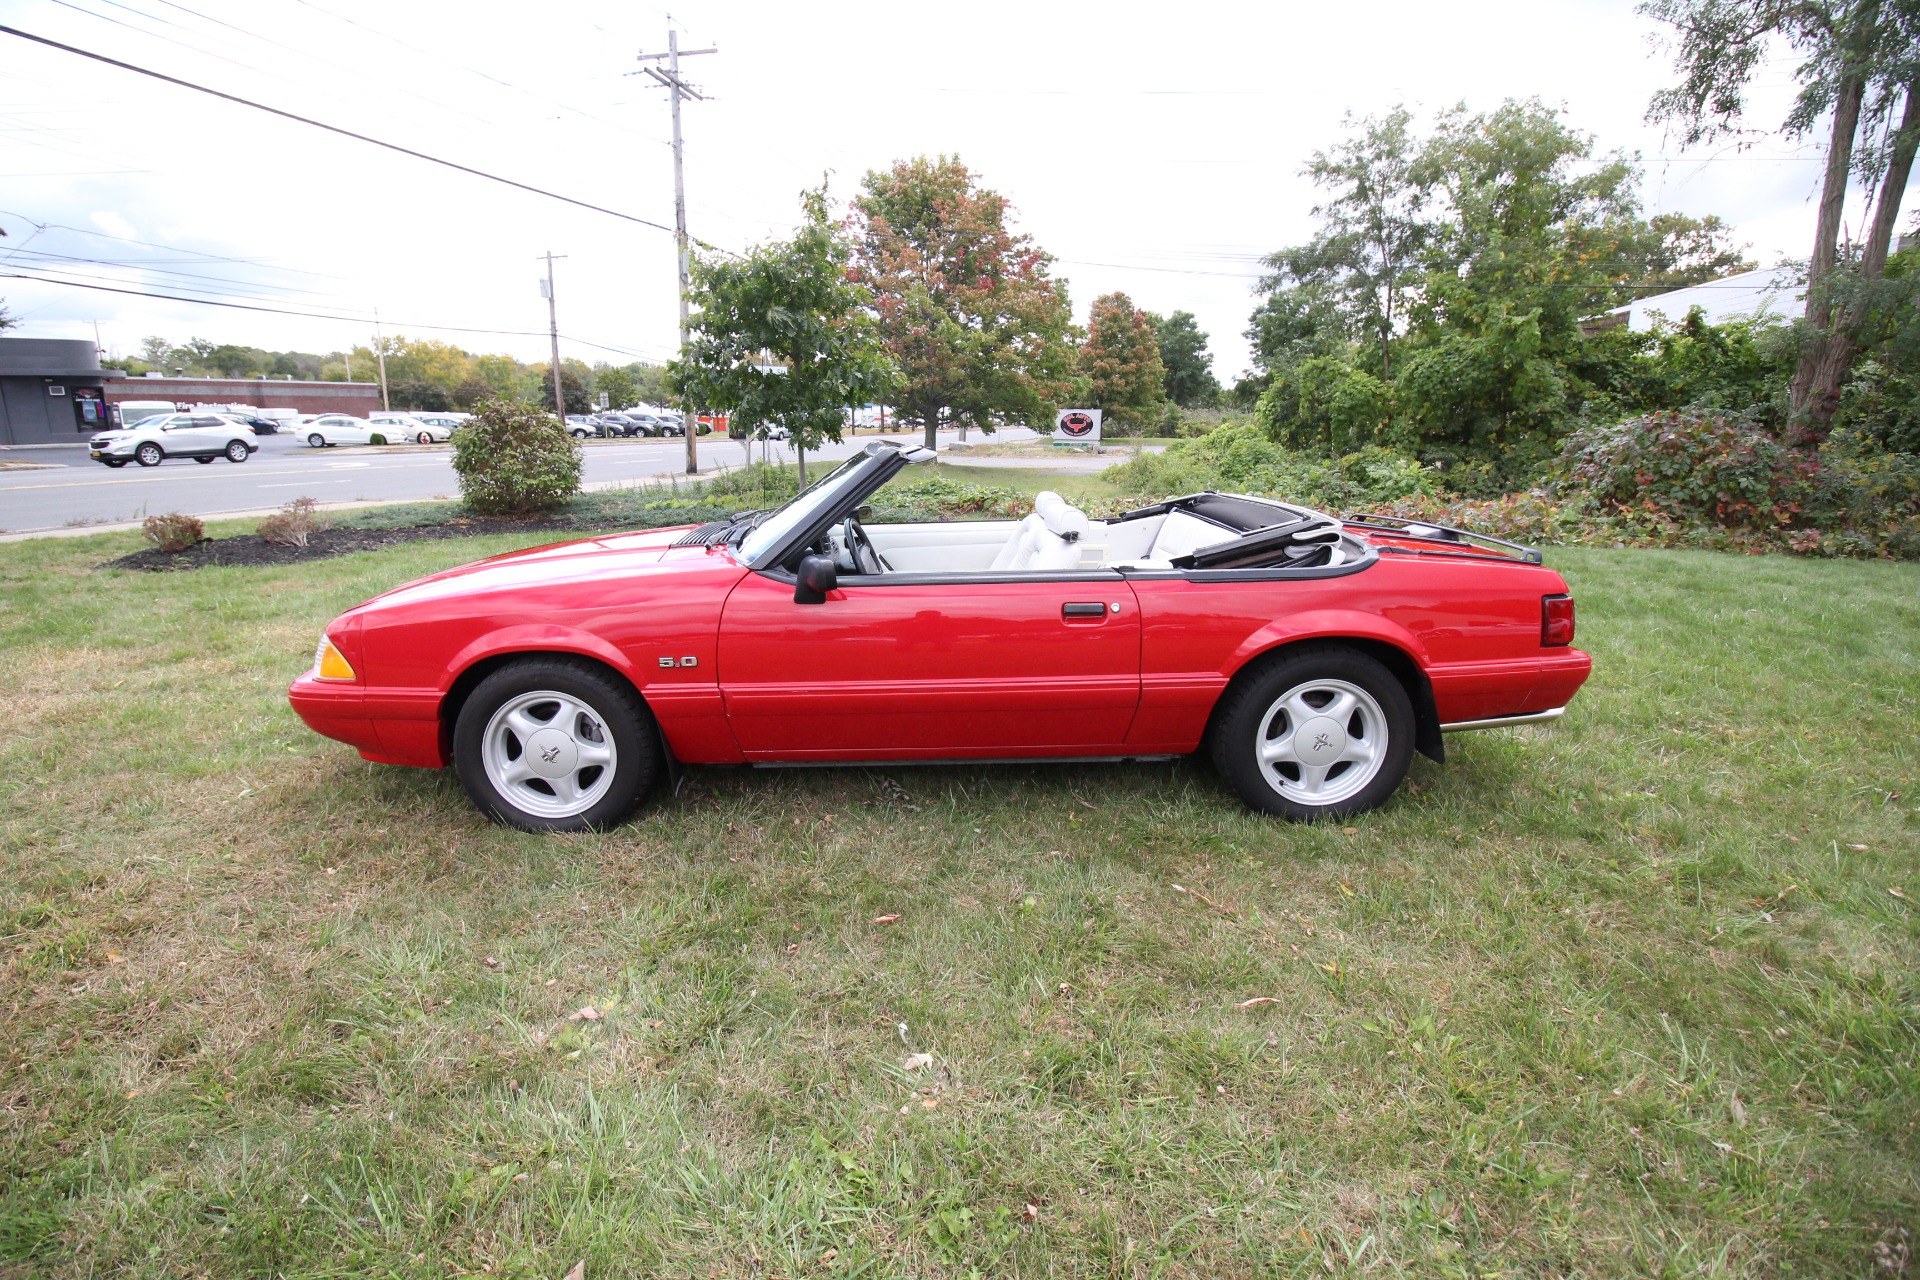 Used 1993 Ford Mustang LX 5.0L CONVERTIBLE 5 SPEED MANUAL RARE CAR RARE CONDITION | Albany, NY